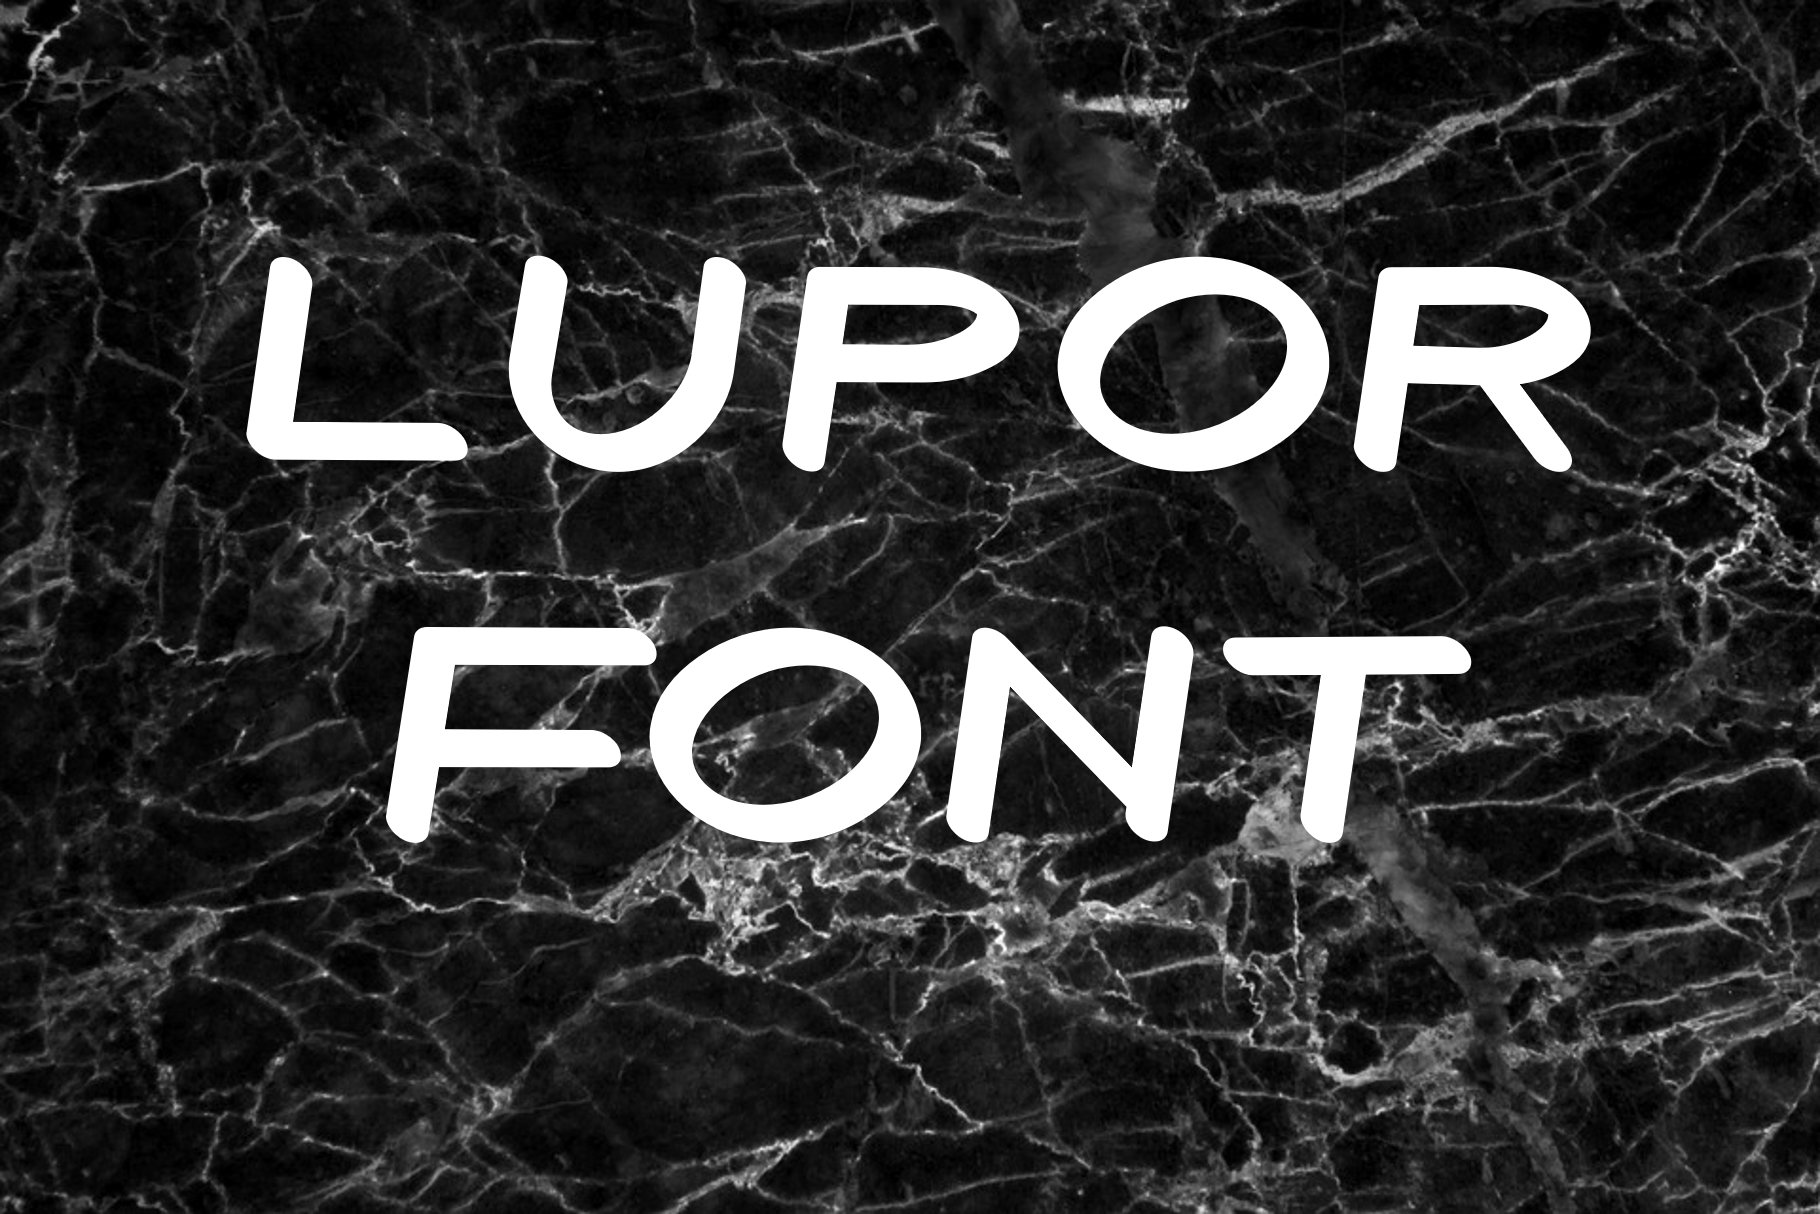 Lupor Font cover image.